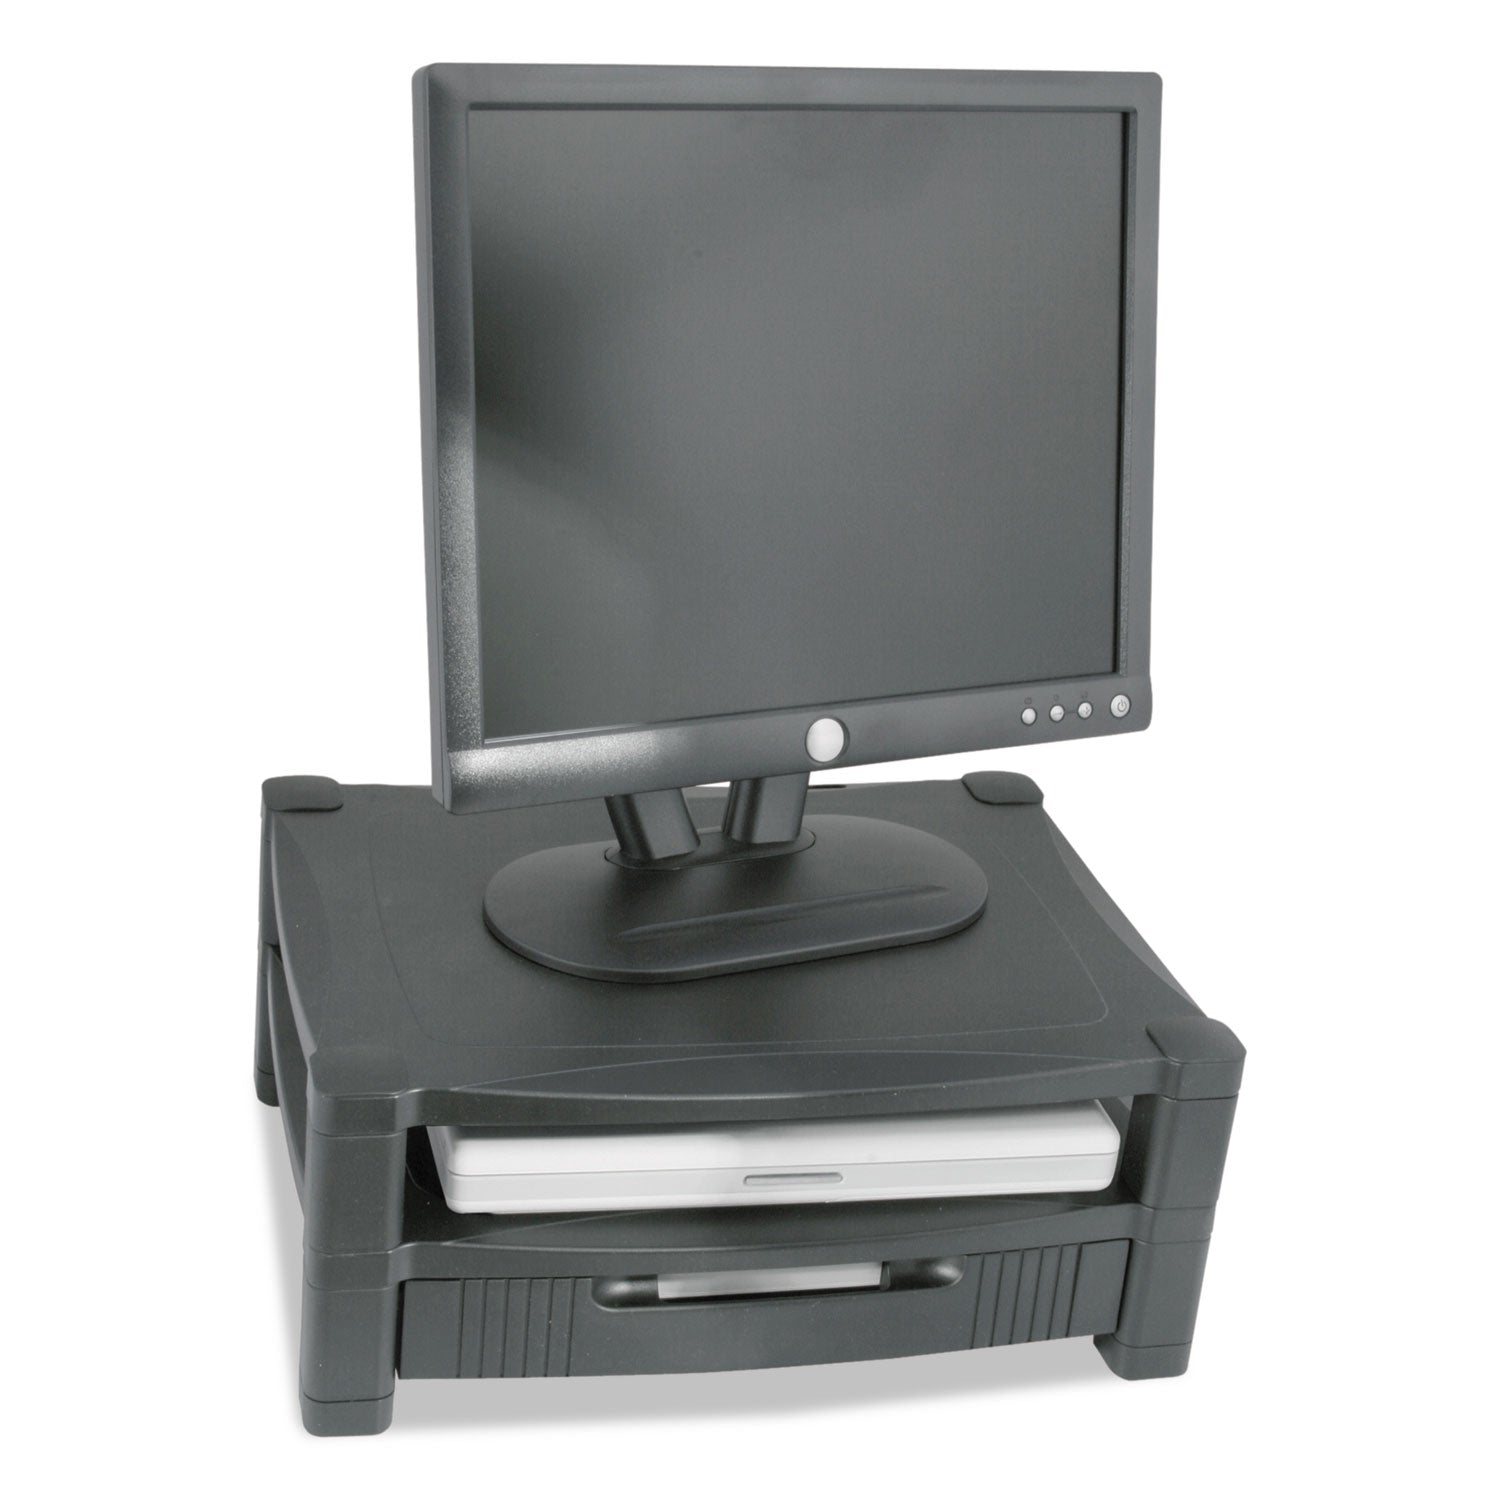 Two-Level Monitor Stand, 17" x 13.25" x 3.5" to 7", Black, Supports 50 lbs - 